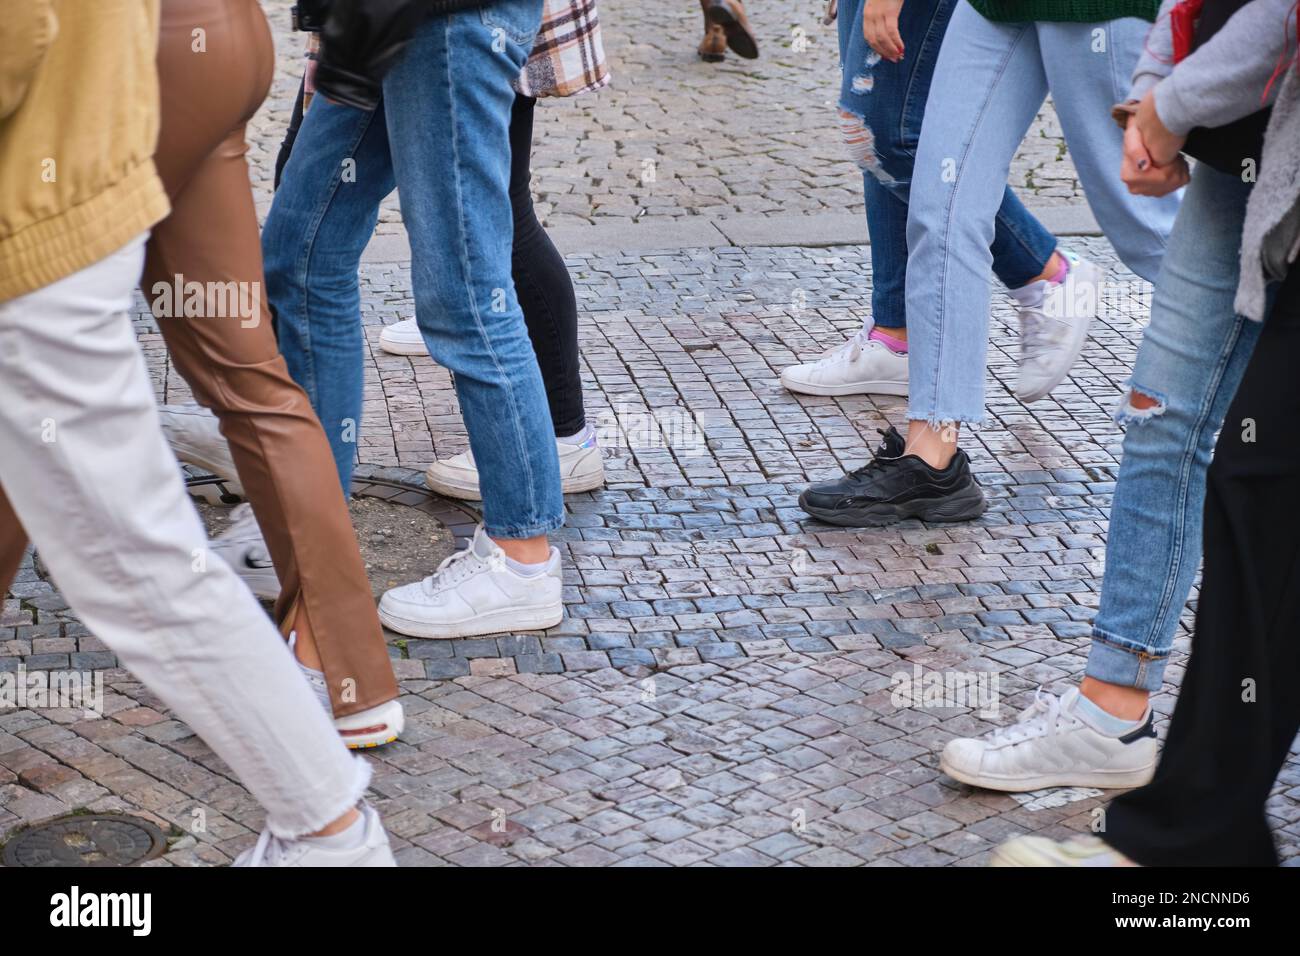 Low Section Of People pedestrians Walking On pavement Sidewalk old city center  Stock Photo